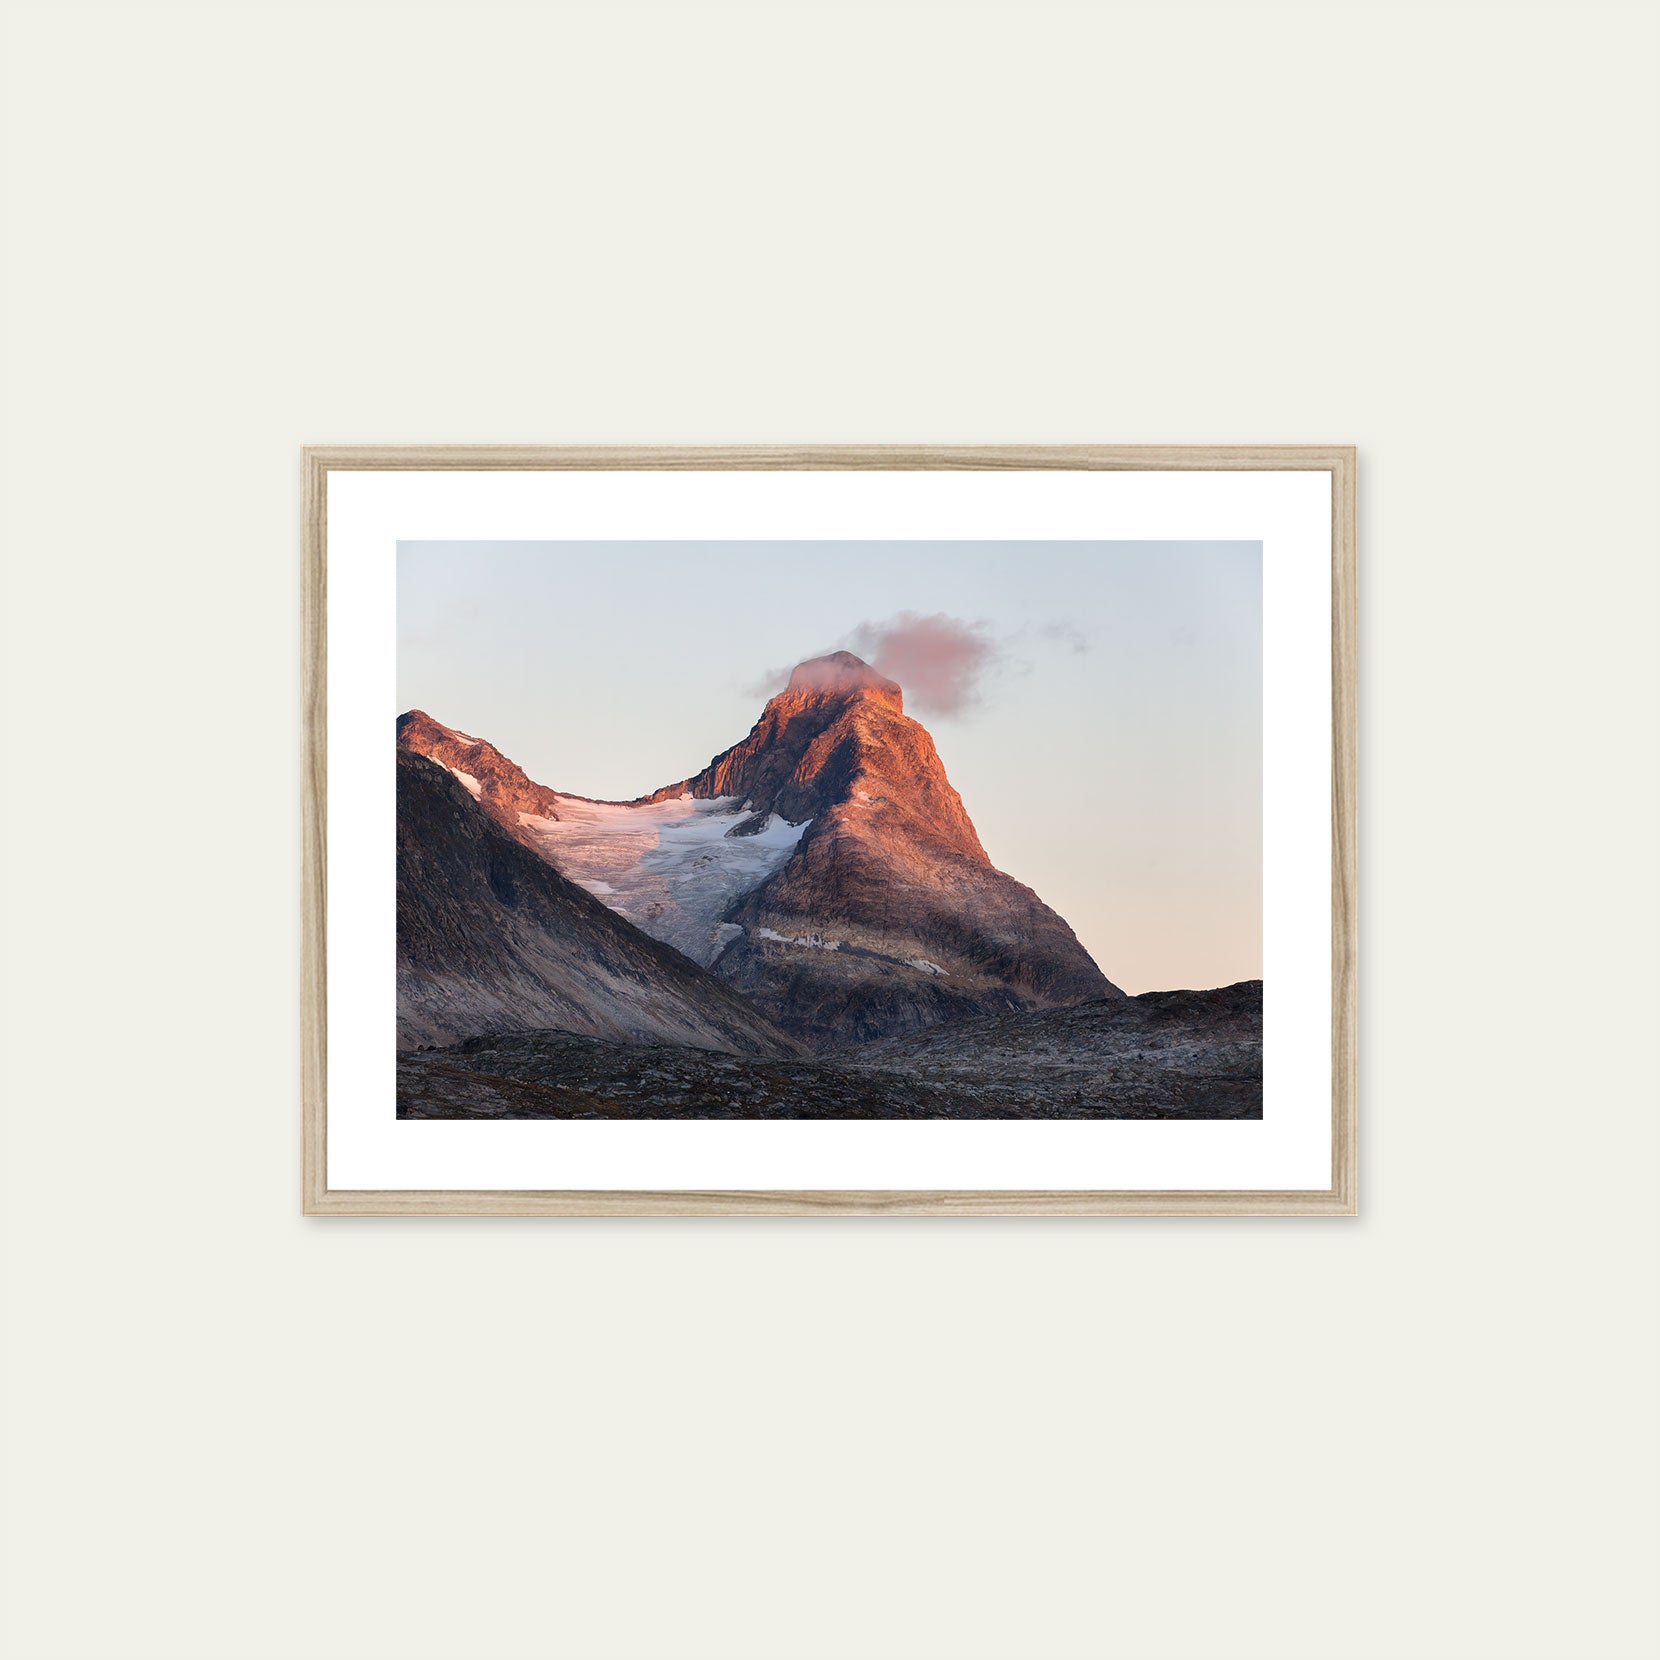 A wood framed print of a mountain peak at sunset